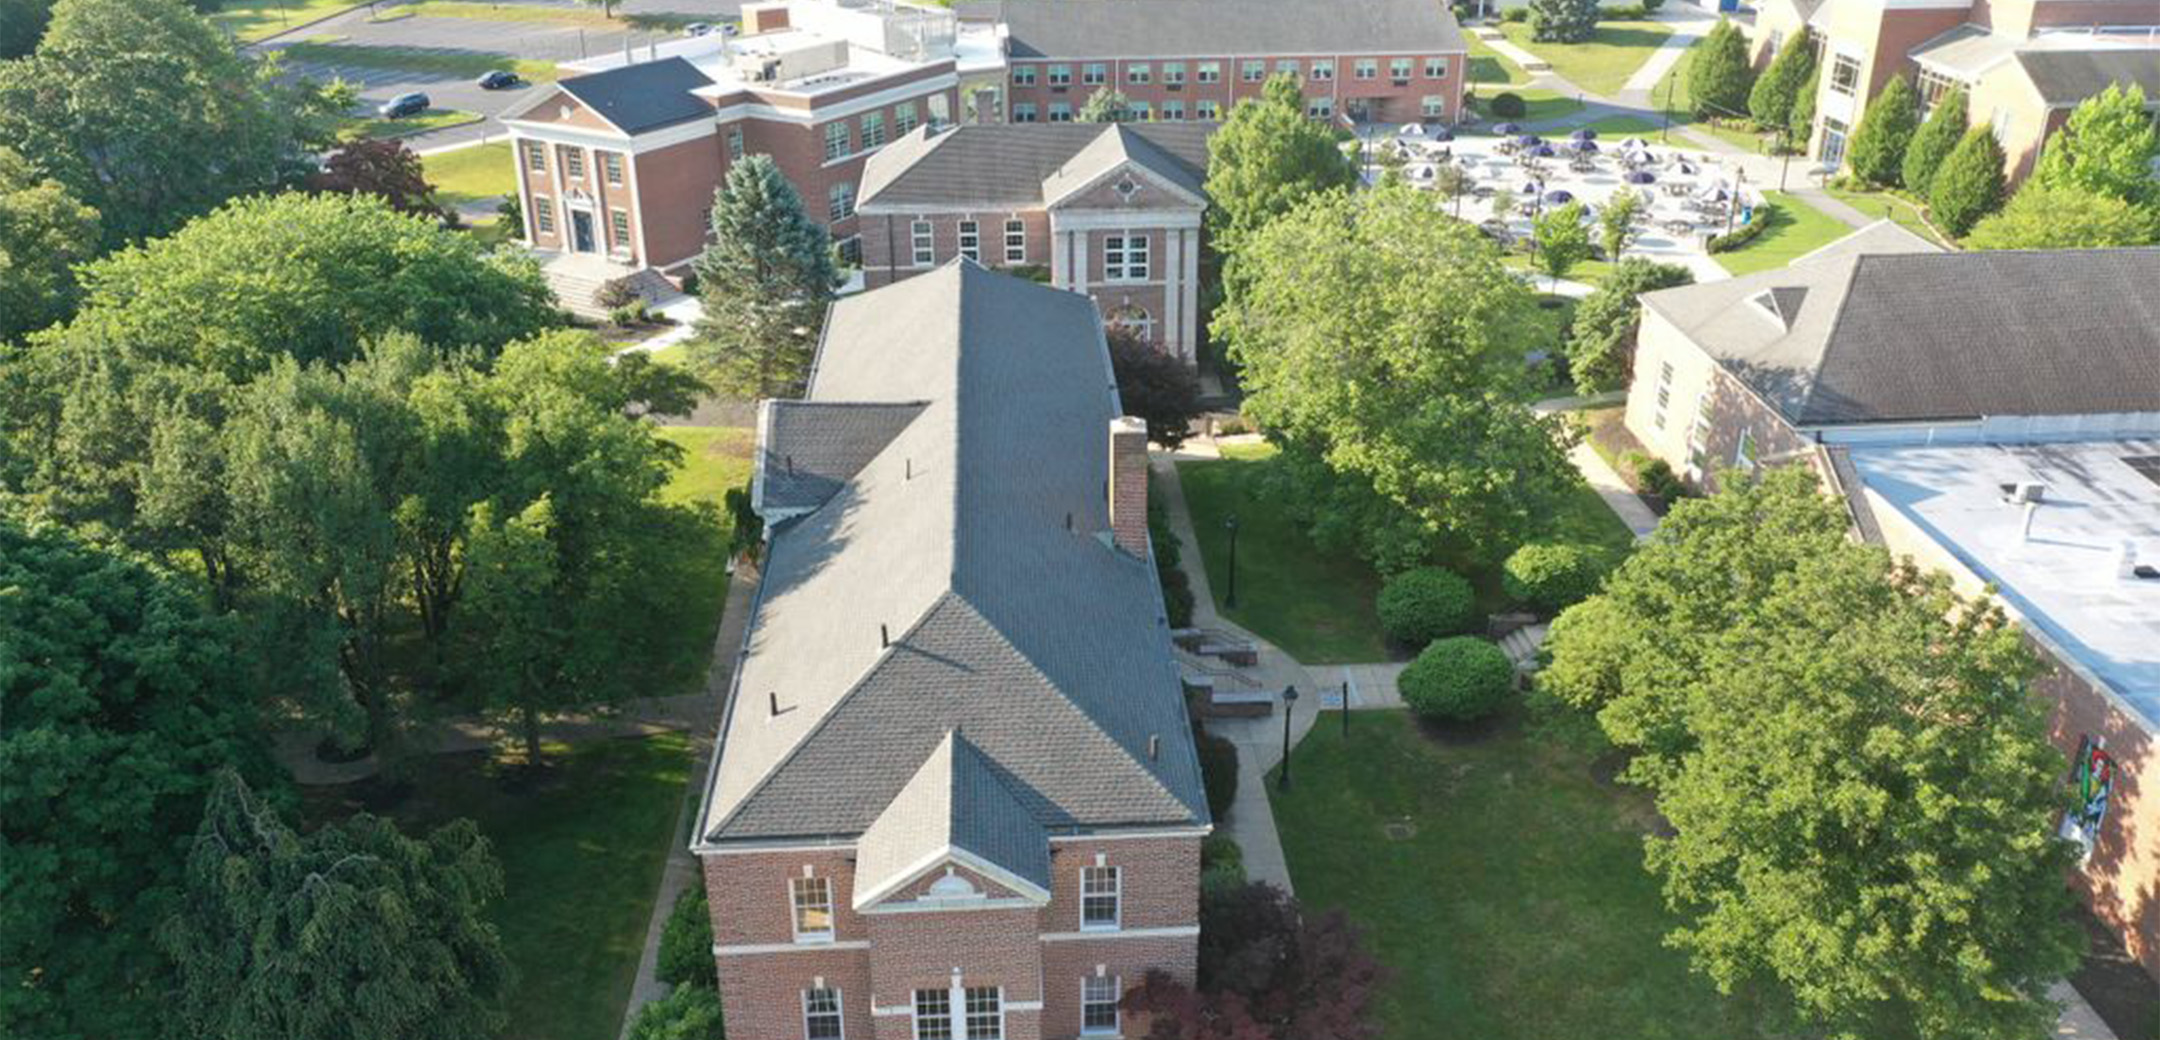 An aerial view of Malvern Preparatory School's Campus with brick buildings and trees